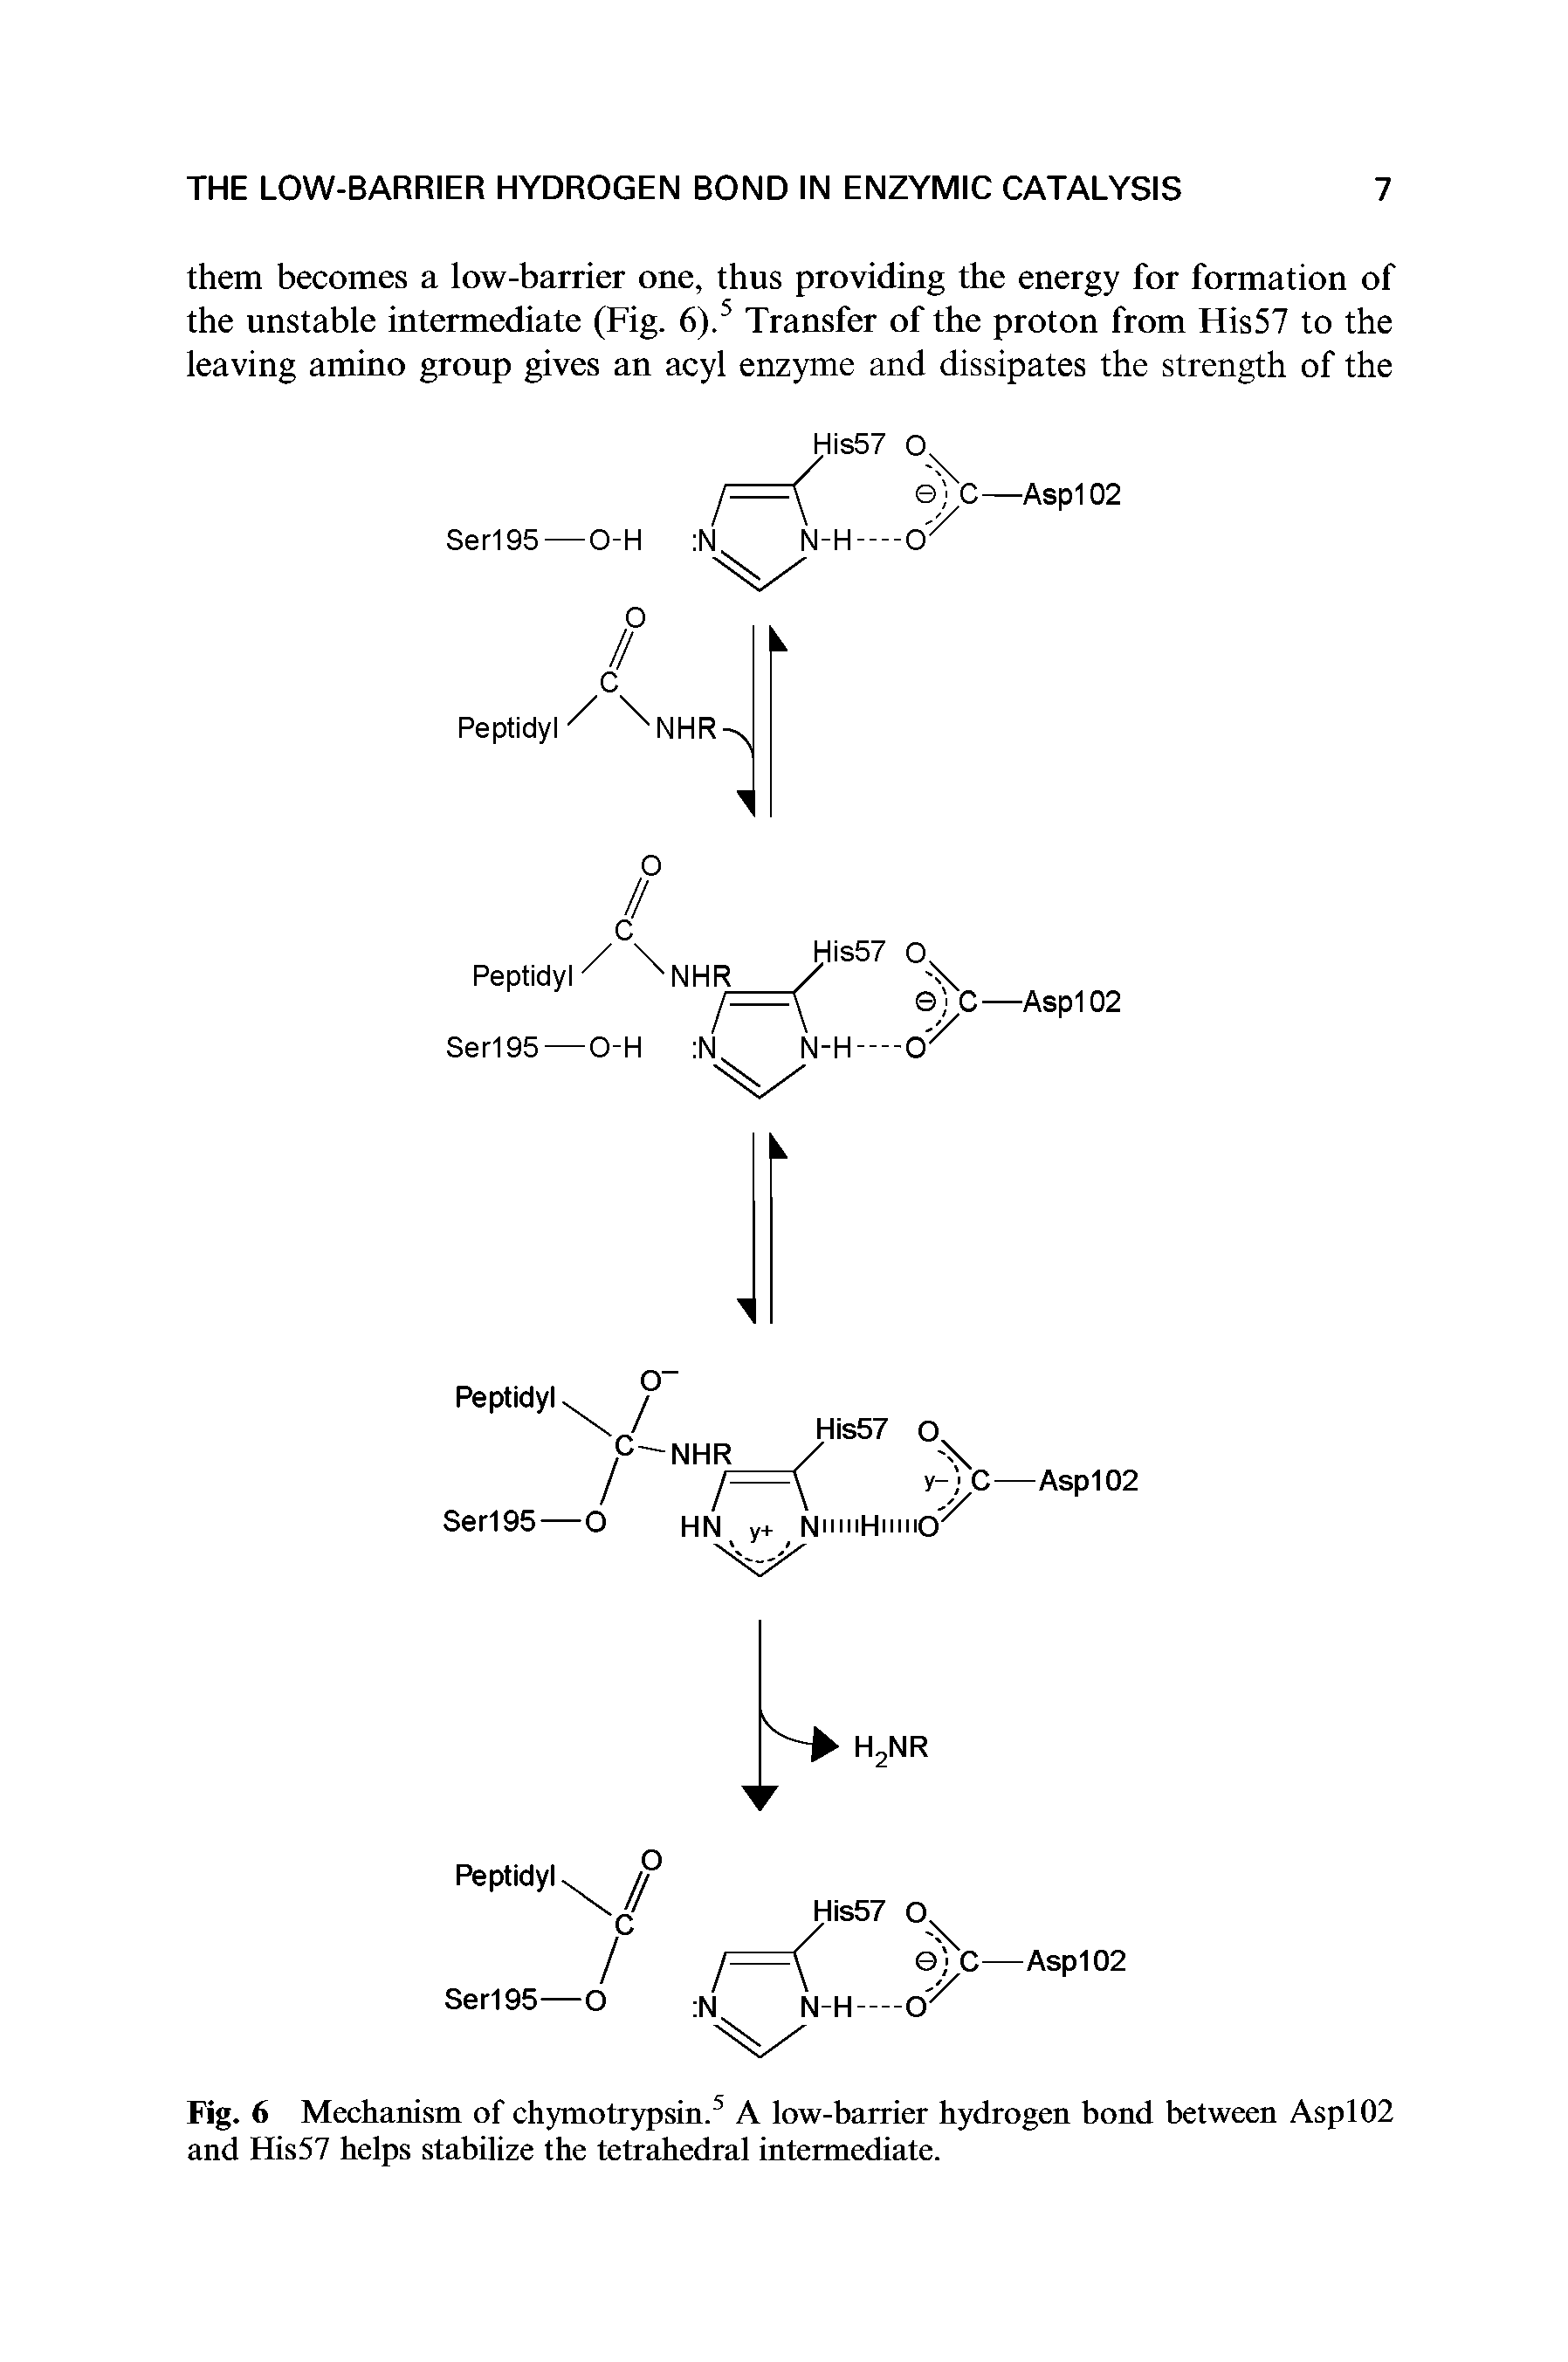 Fig. 6 Mechanism of chymotrypsin.5 A low-barrier hydrogen bond between Aspl02 and His57 helps stabilize the tetrahedral intermediate.